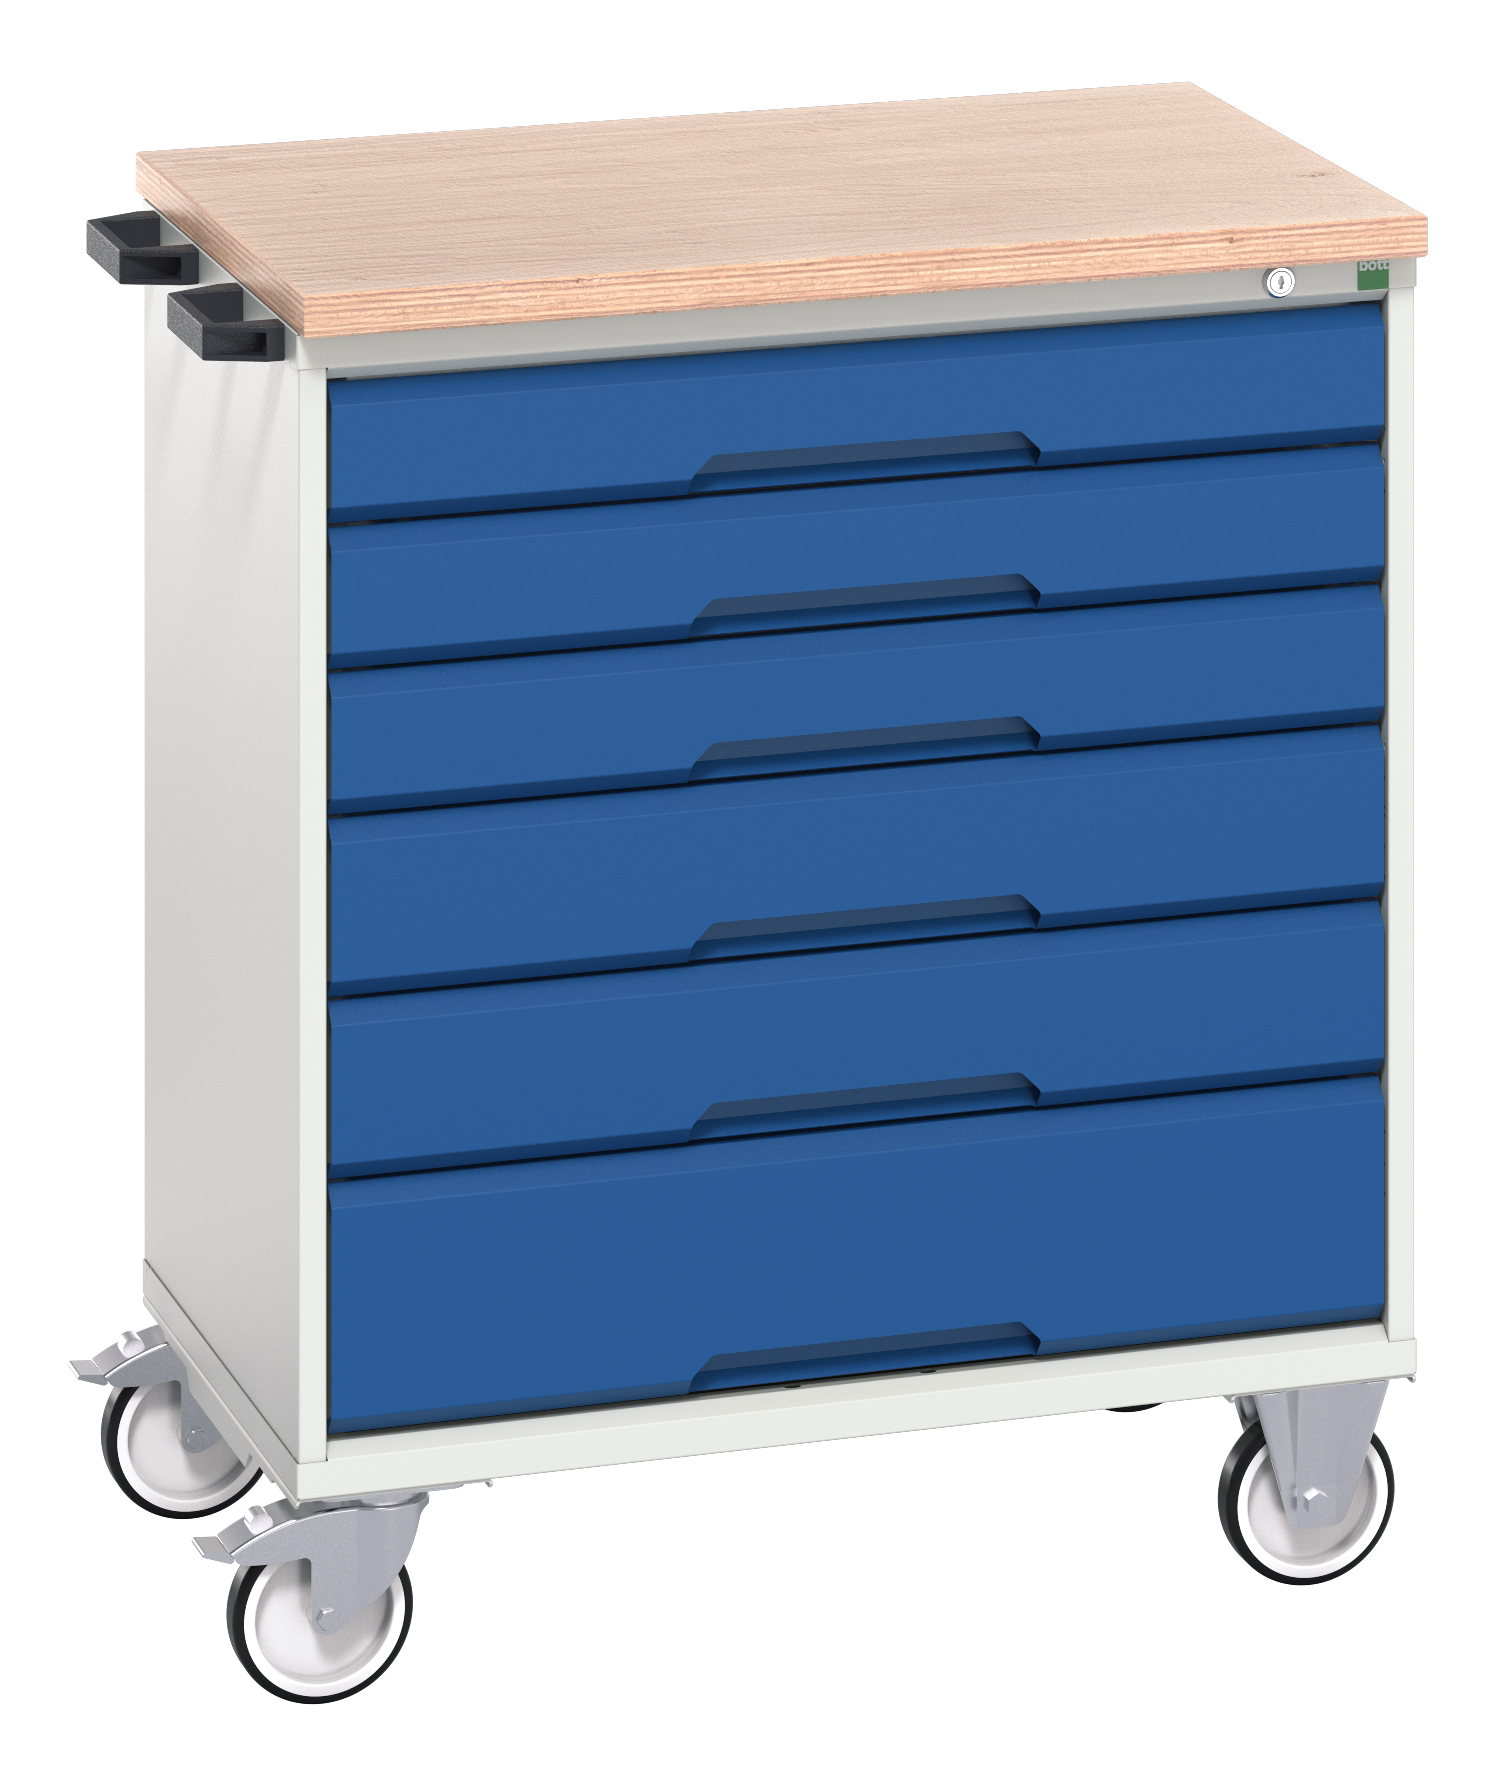 Bott Verso Mobile Drawer Cabinet With 6 Drawers & Multiplex Top - 16927004.11